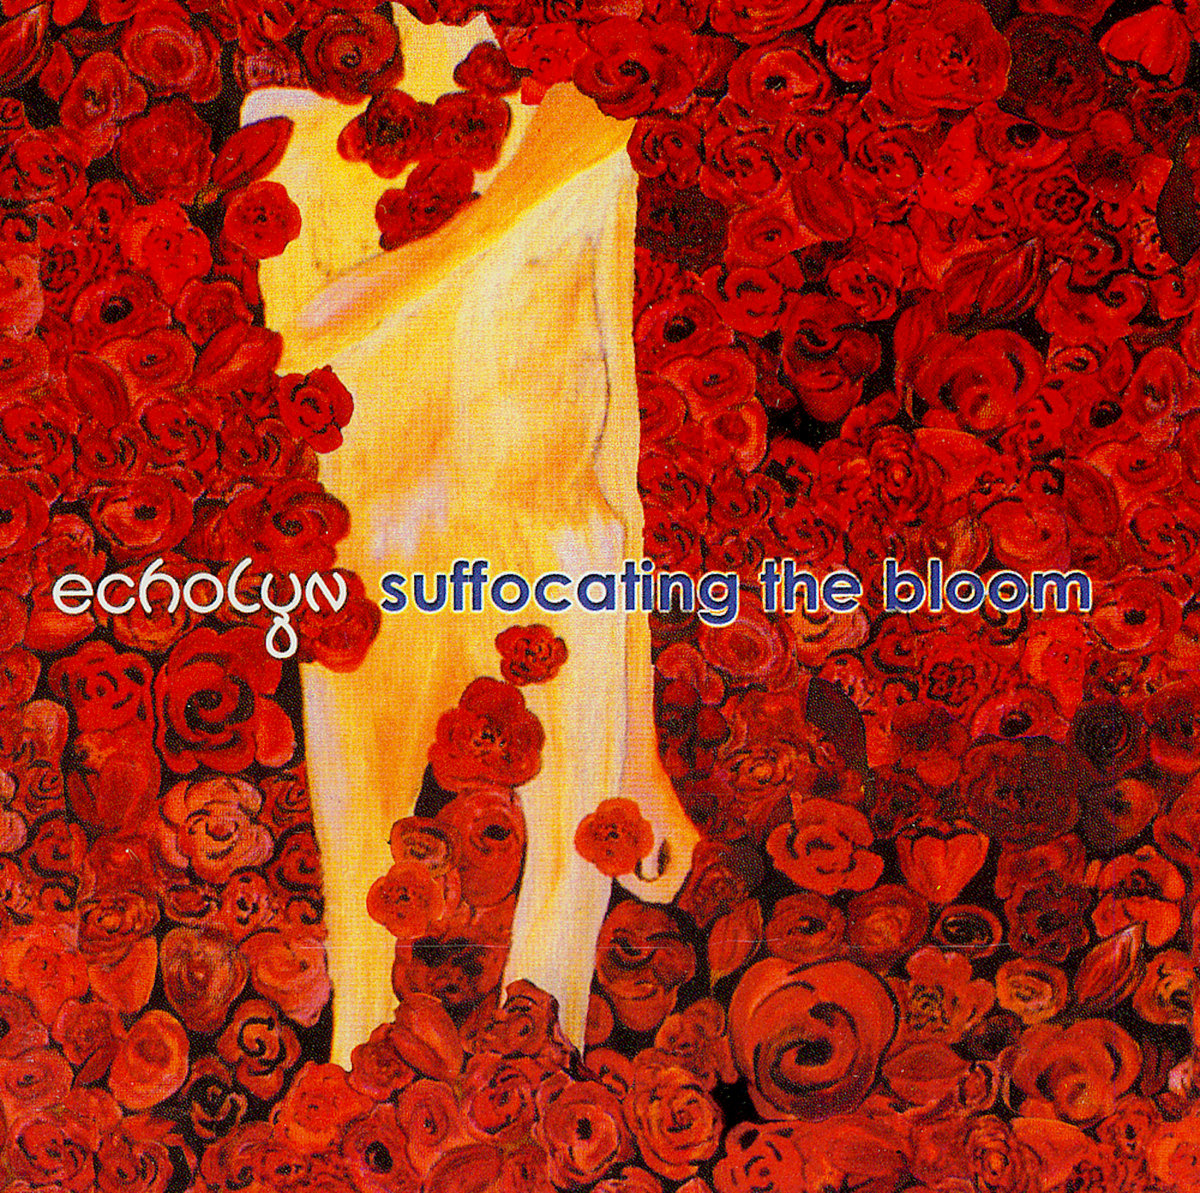 echolyn suffocating the bloom